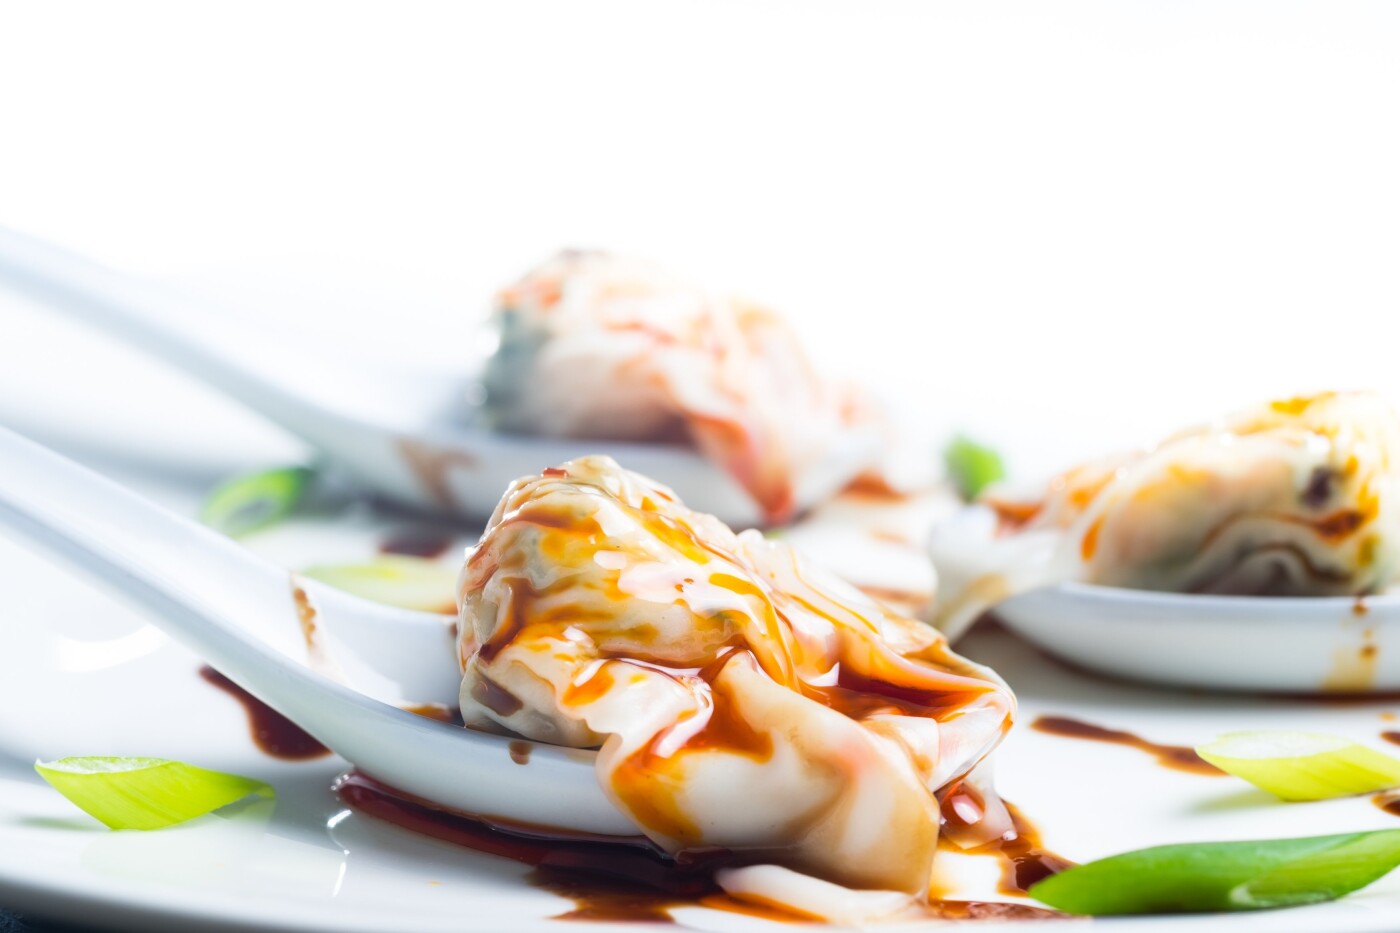 Chaozhou means Wonton in Szechuanese dialect (the area of Southwest China). Unlike serving with soup commonly, the traditional Szechuan way is to dress with sesame oil, soy sauce, and red chilli oil. Therefore, the full name of this famous Szhcuanese cuisine is Chaozhou with Red Chilli Oil.